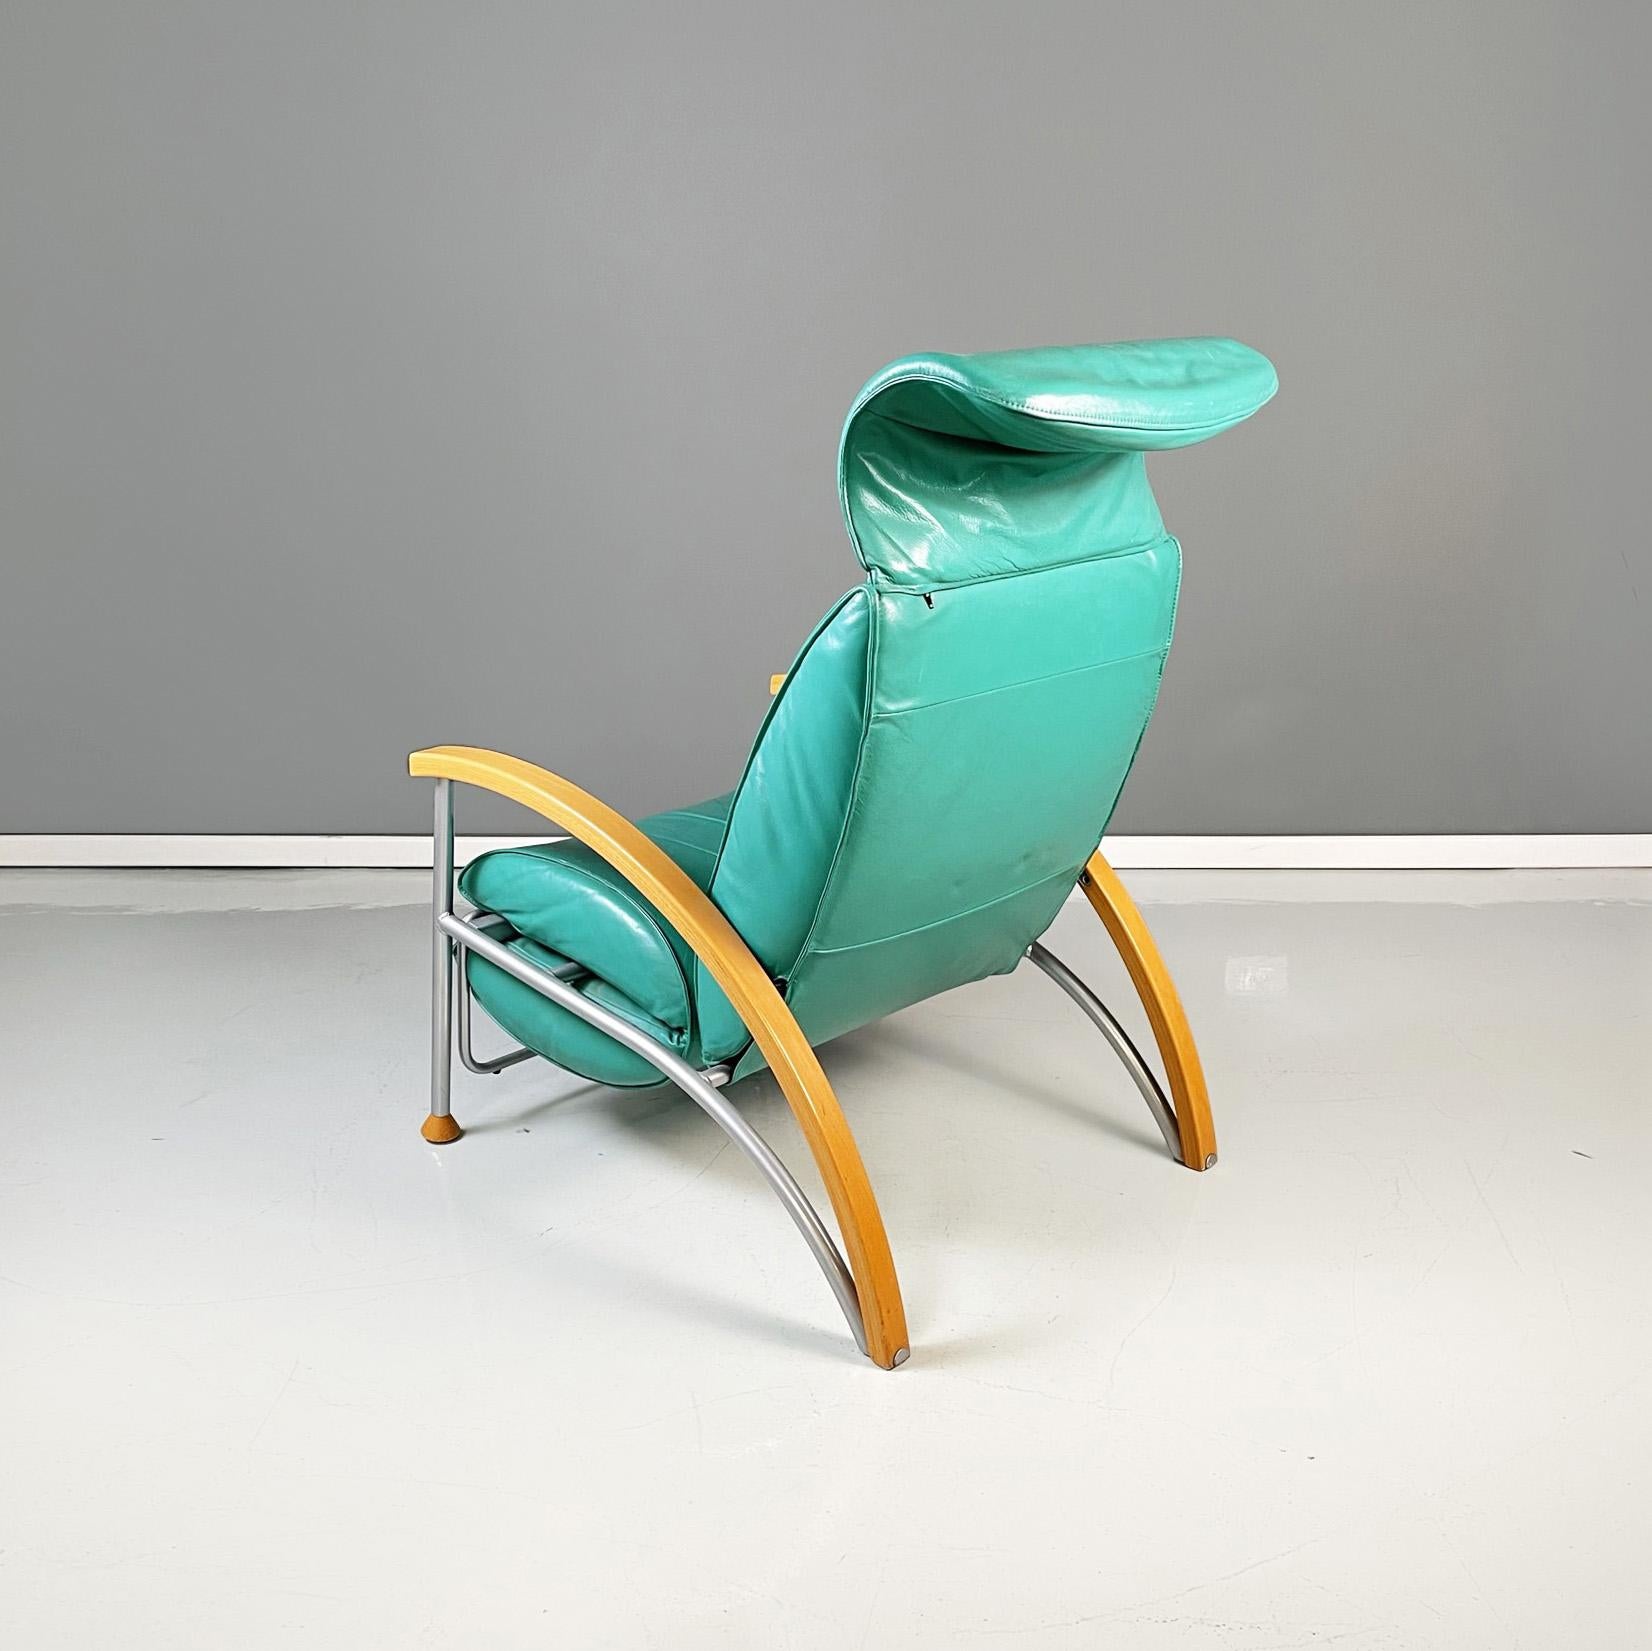 Italian Modern Armchair in Aqua-Green Leather, Wood and Metal, 1980s For Sale 2